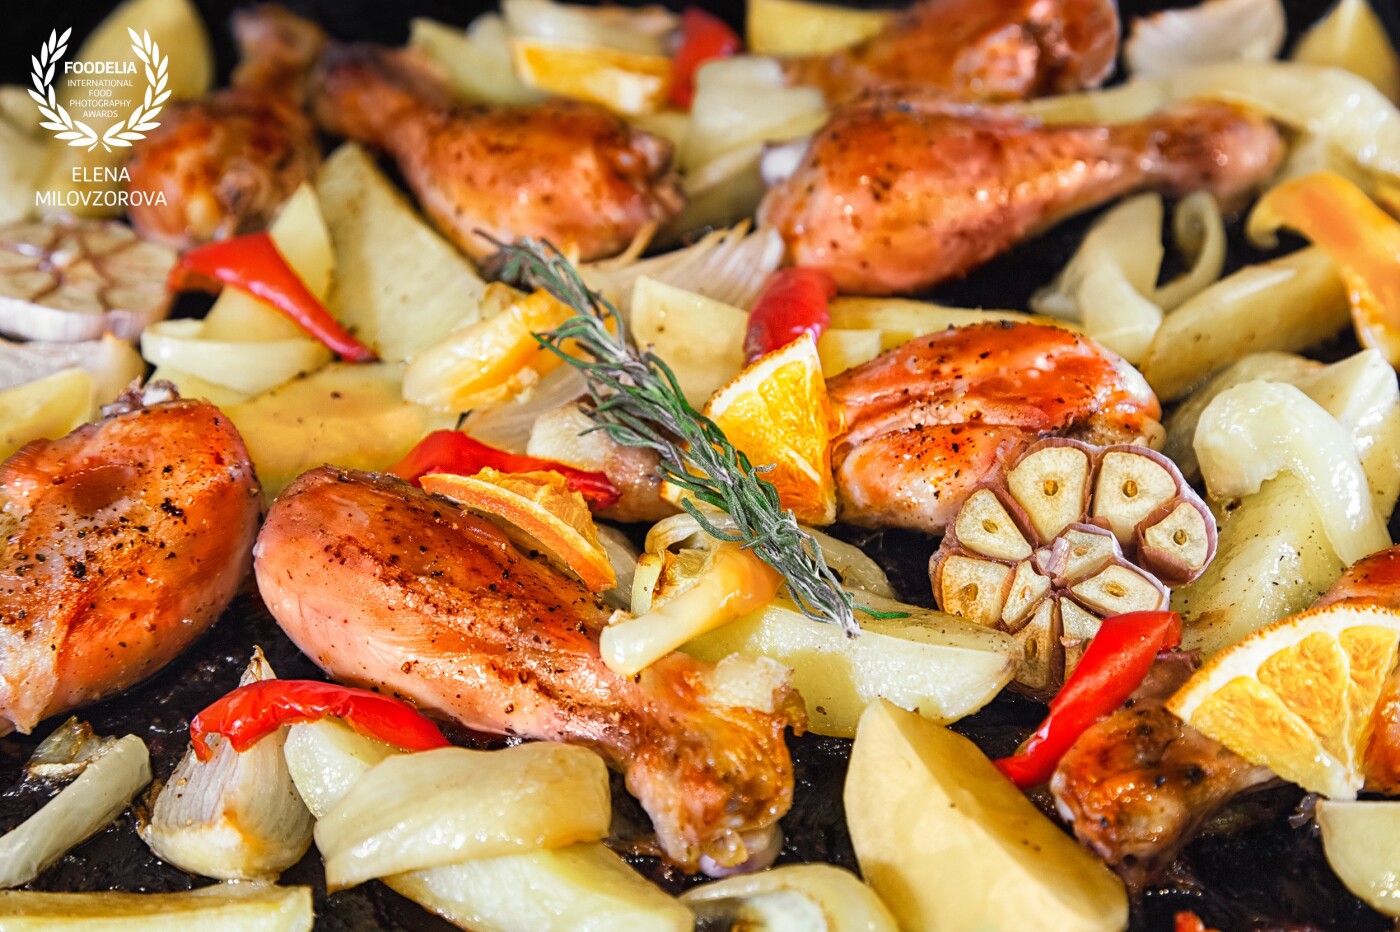 I like this home-cooked meal. Cooked in the oven, chicken, onions, potatoes, sweet pepper and orange. Decorated with herbs. I wanted to convey the juiciness and flavor of this delicious dish.